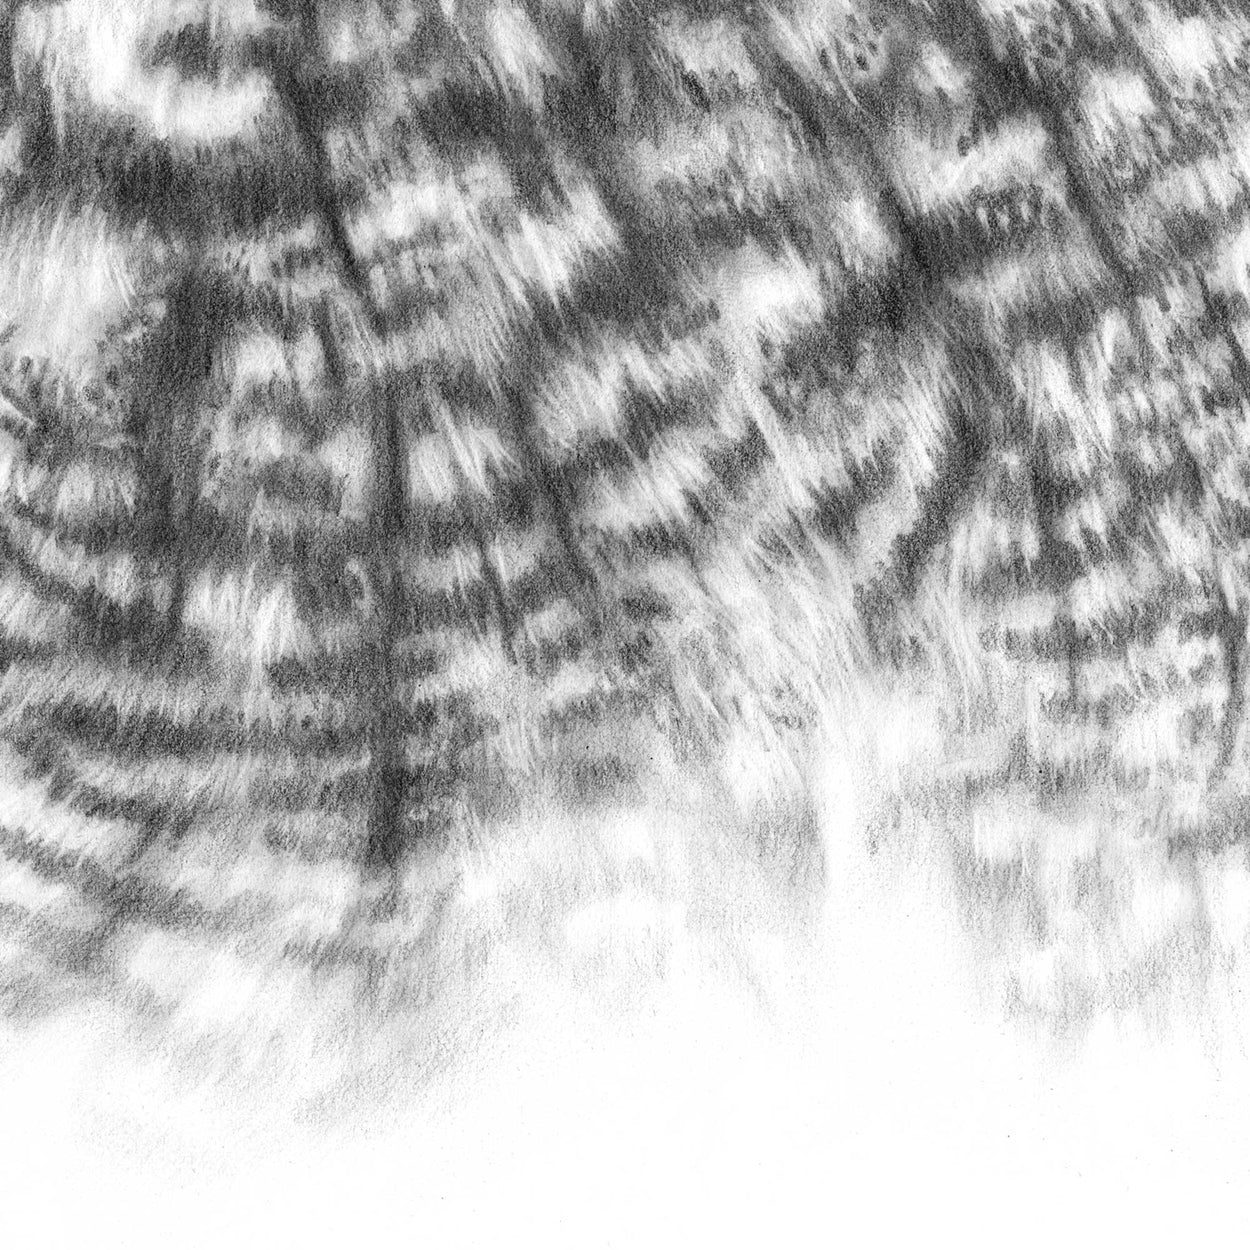 Close-up of a black and white pencil drawing of great horned owl feathers